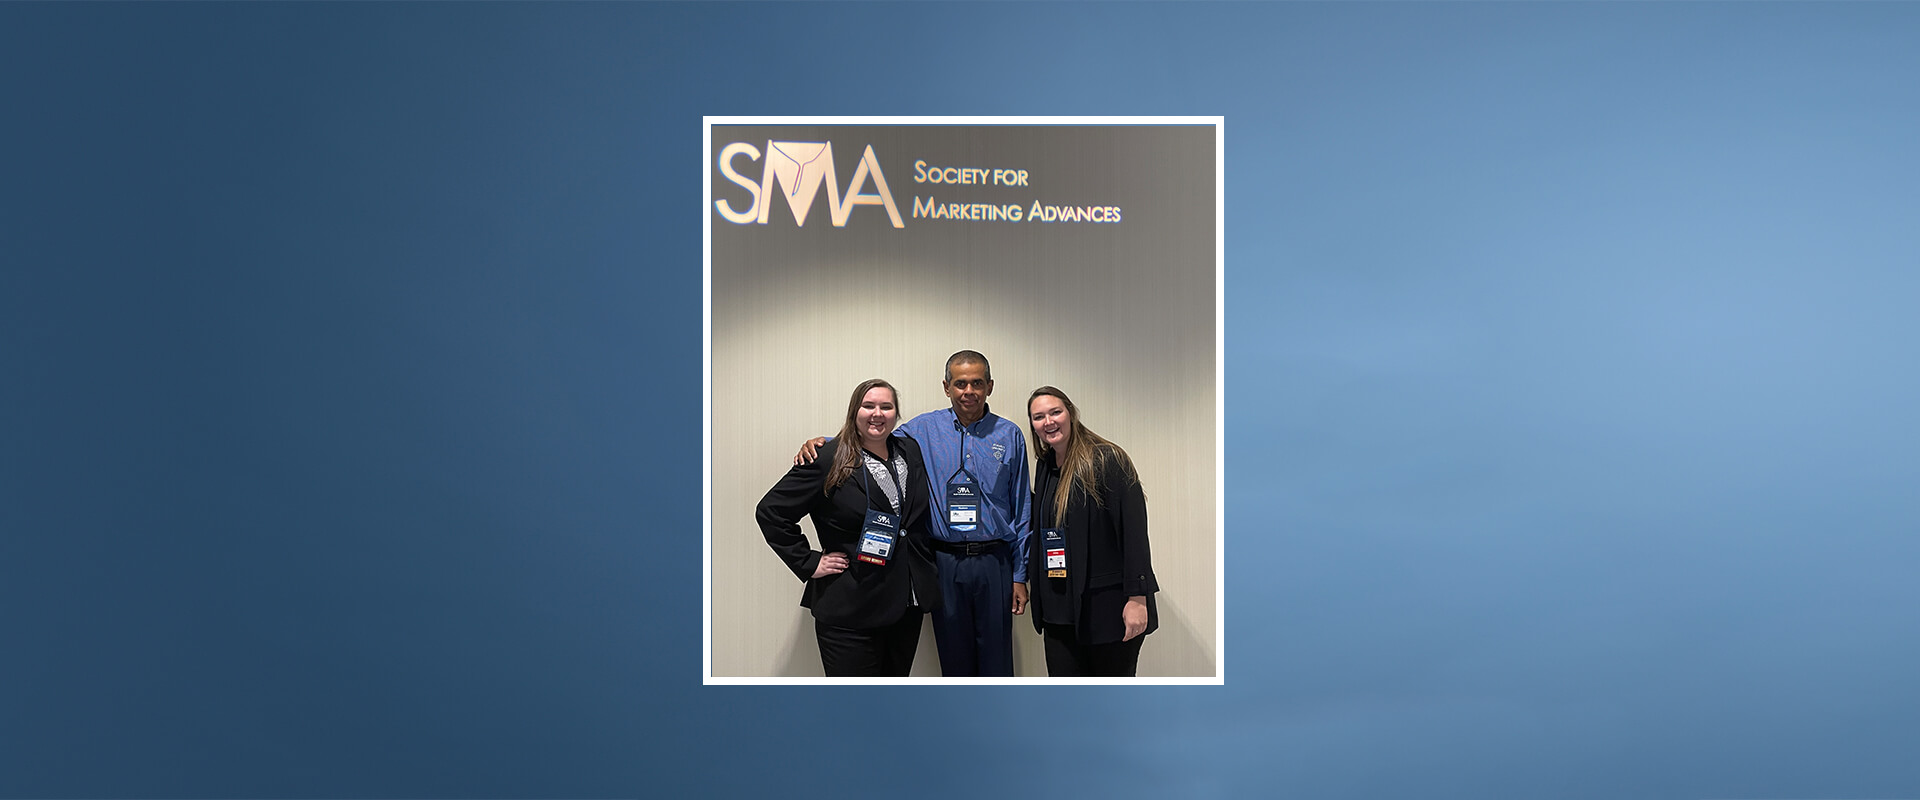 Danielle Hass and Ashley Hass pose with Mathew Joseph, Ph.D., at a conference in Orlando, Florida.